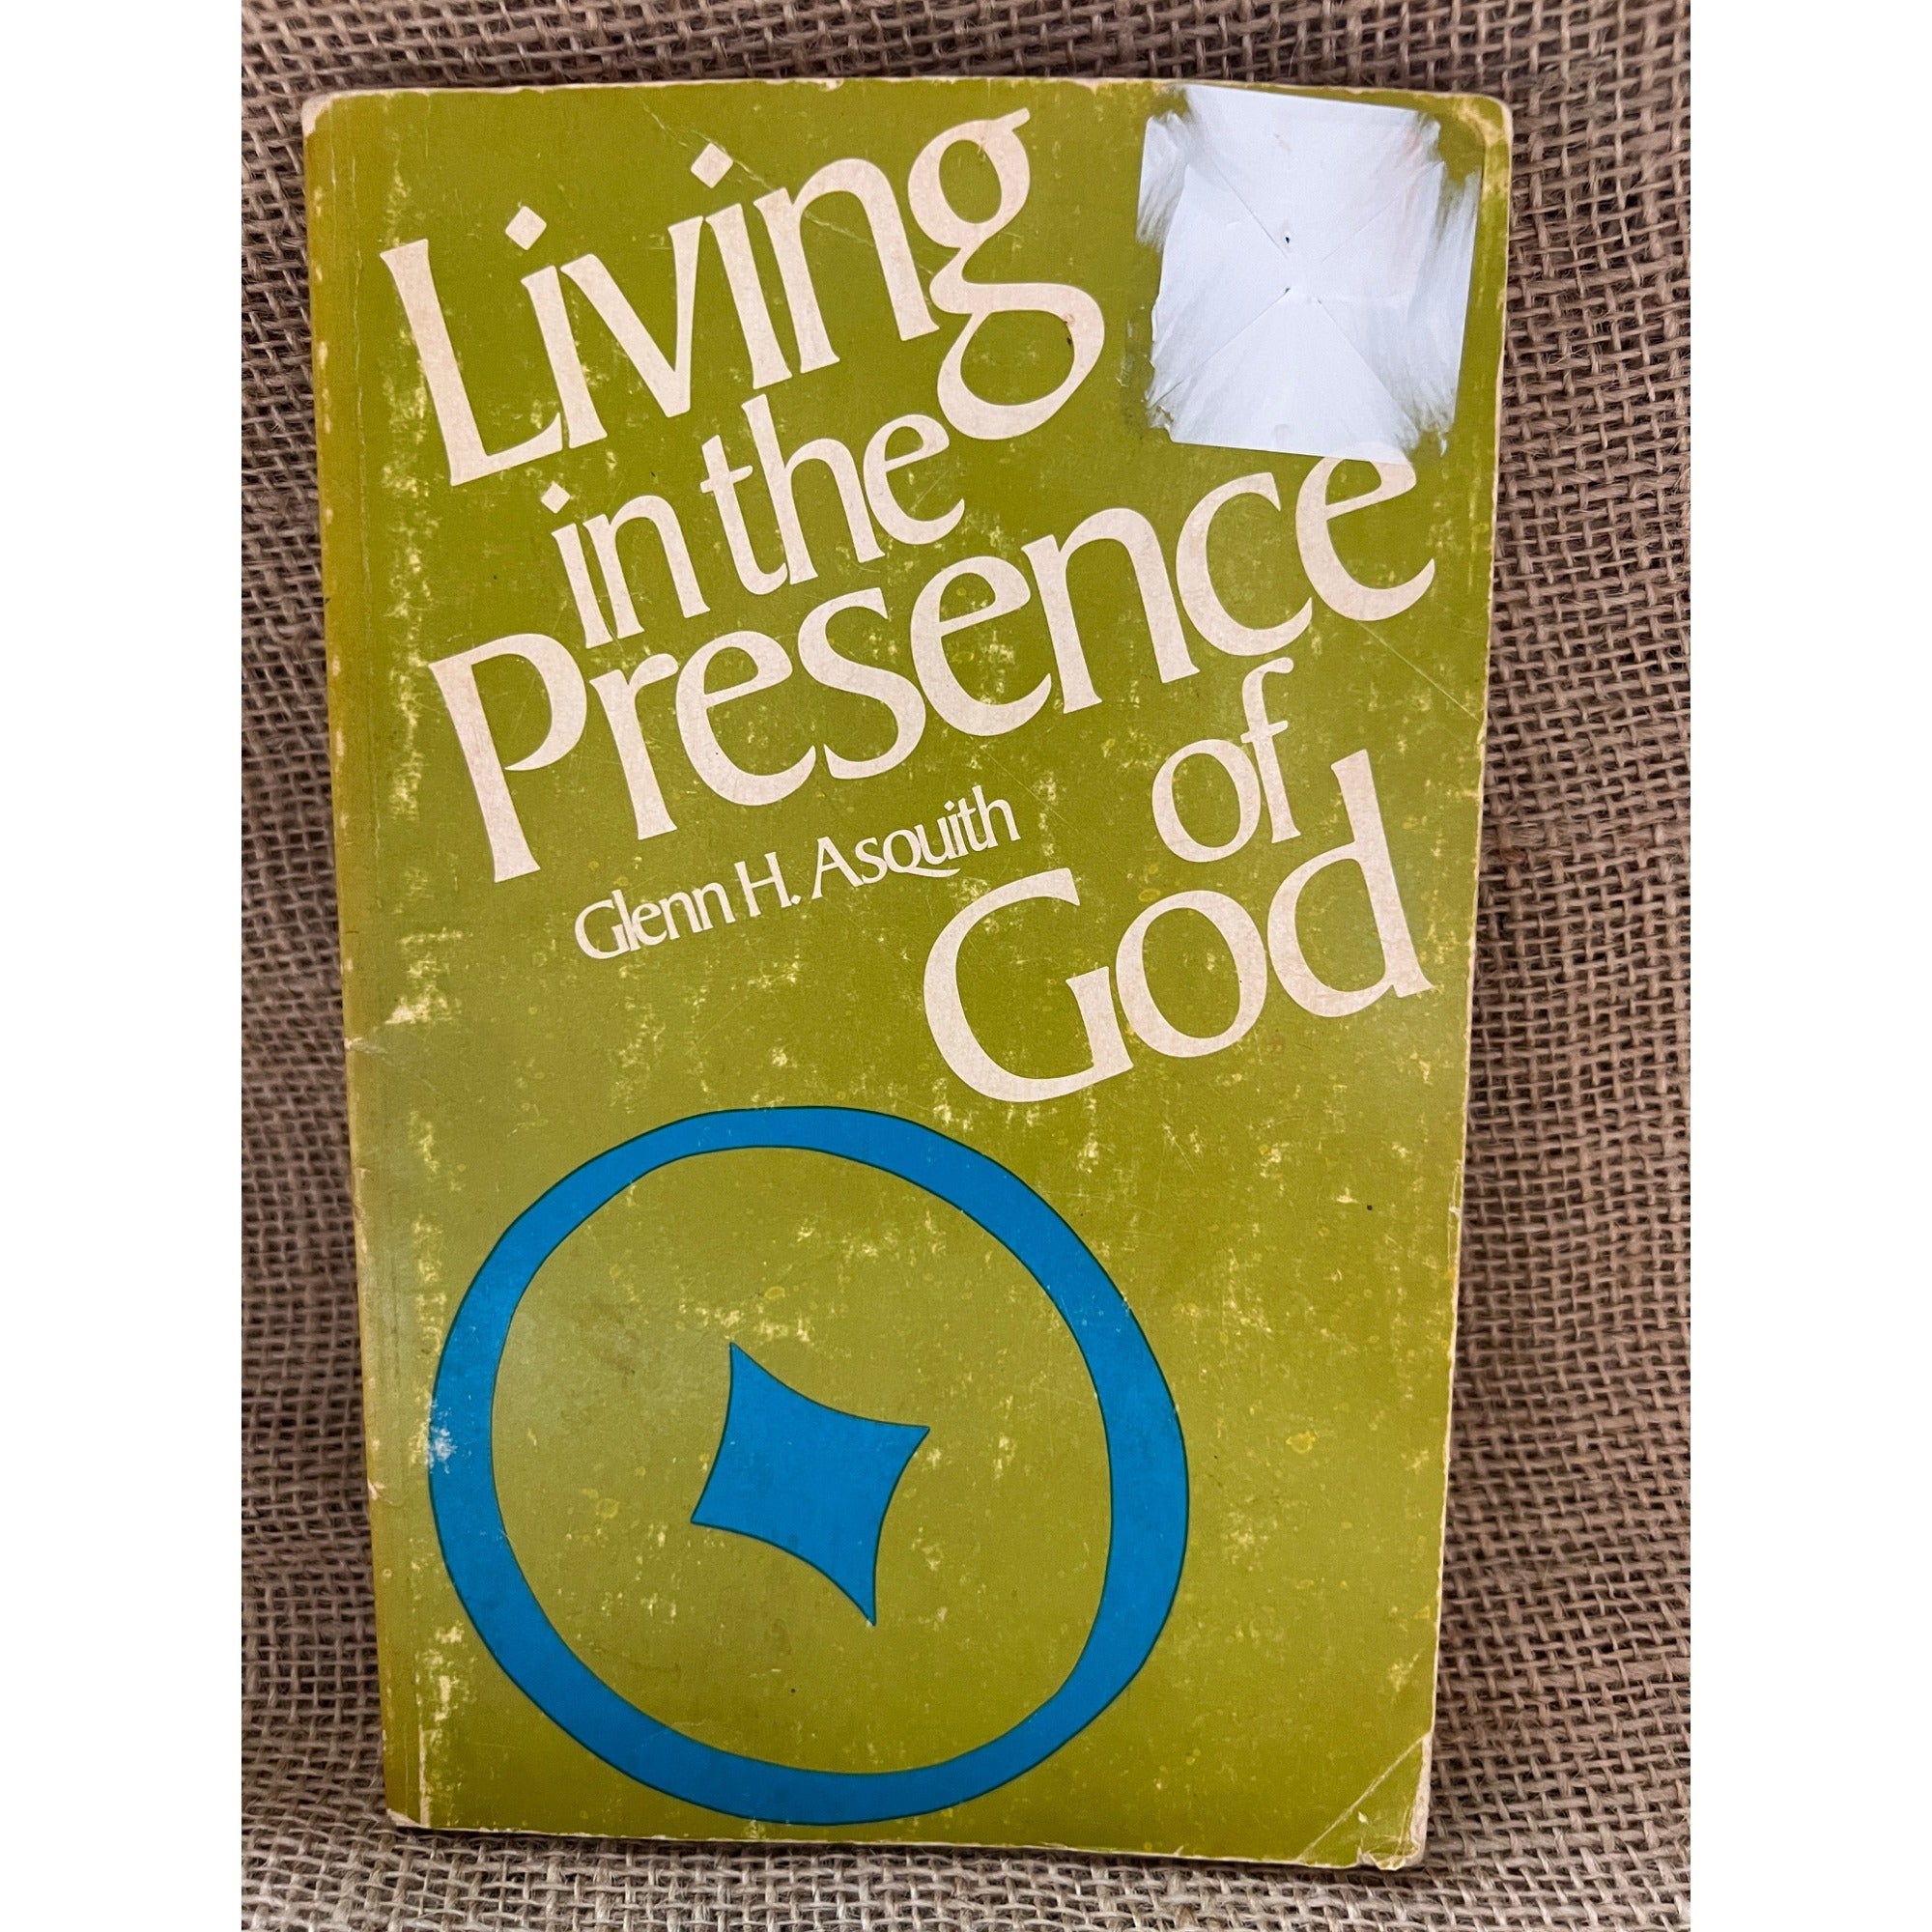 Living in the Presence of God by Glenn H Asquith, Paperback, Christian Vintage